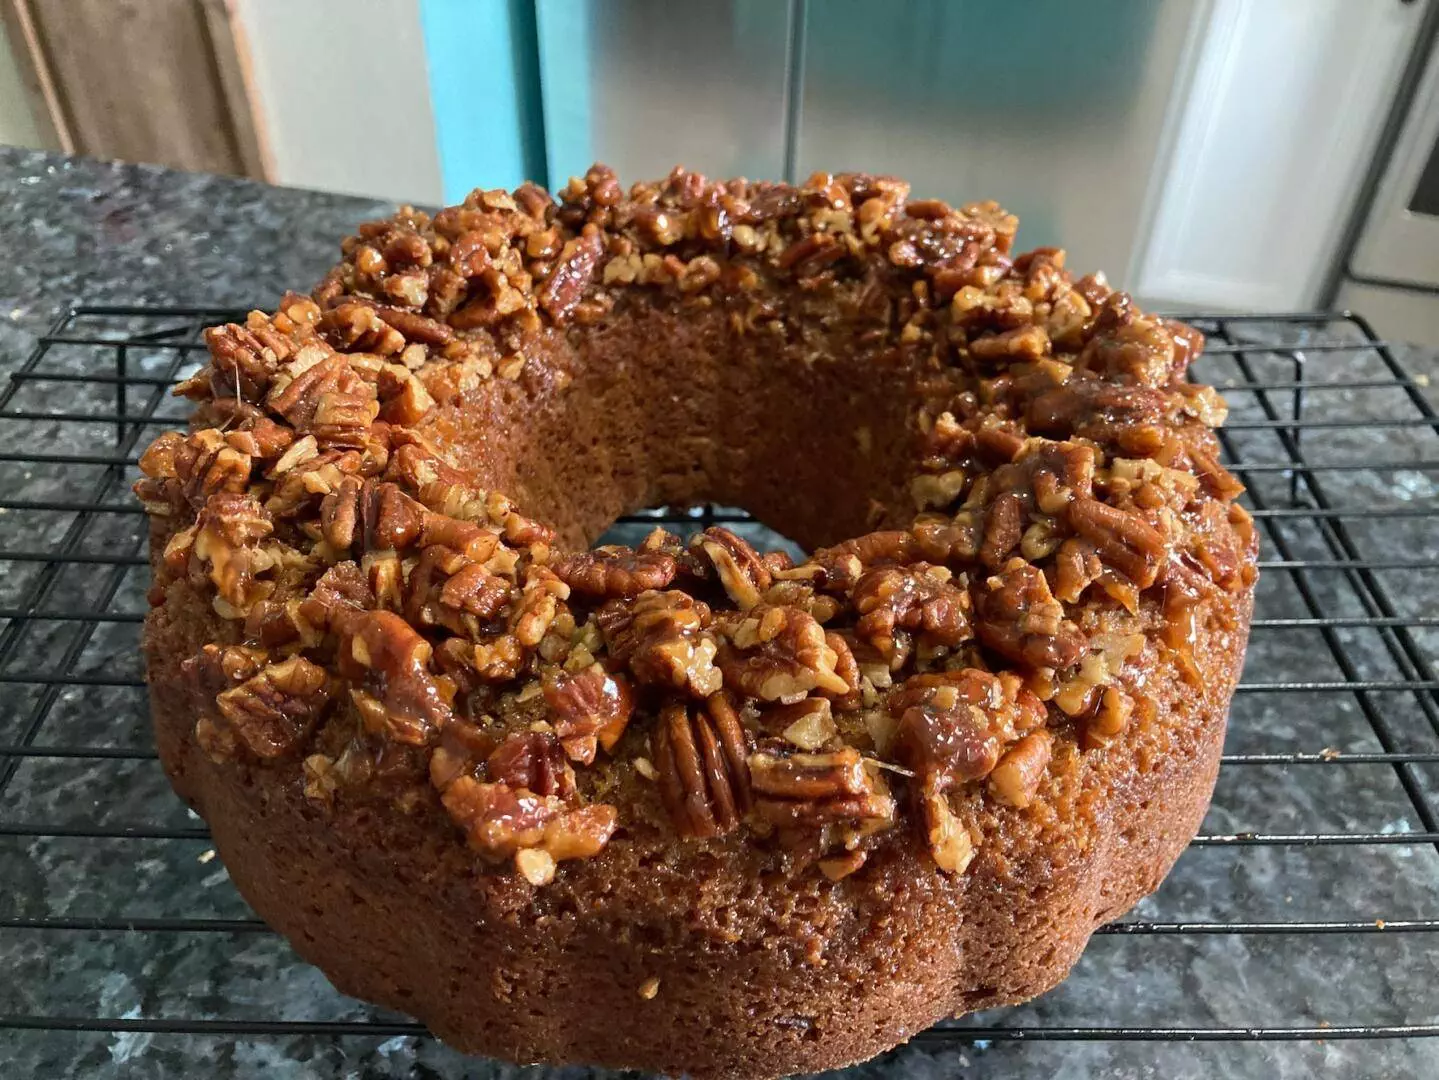 Butter Pecan Bundt Cake (with Praline Topping) from Out of the Box Baking.com